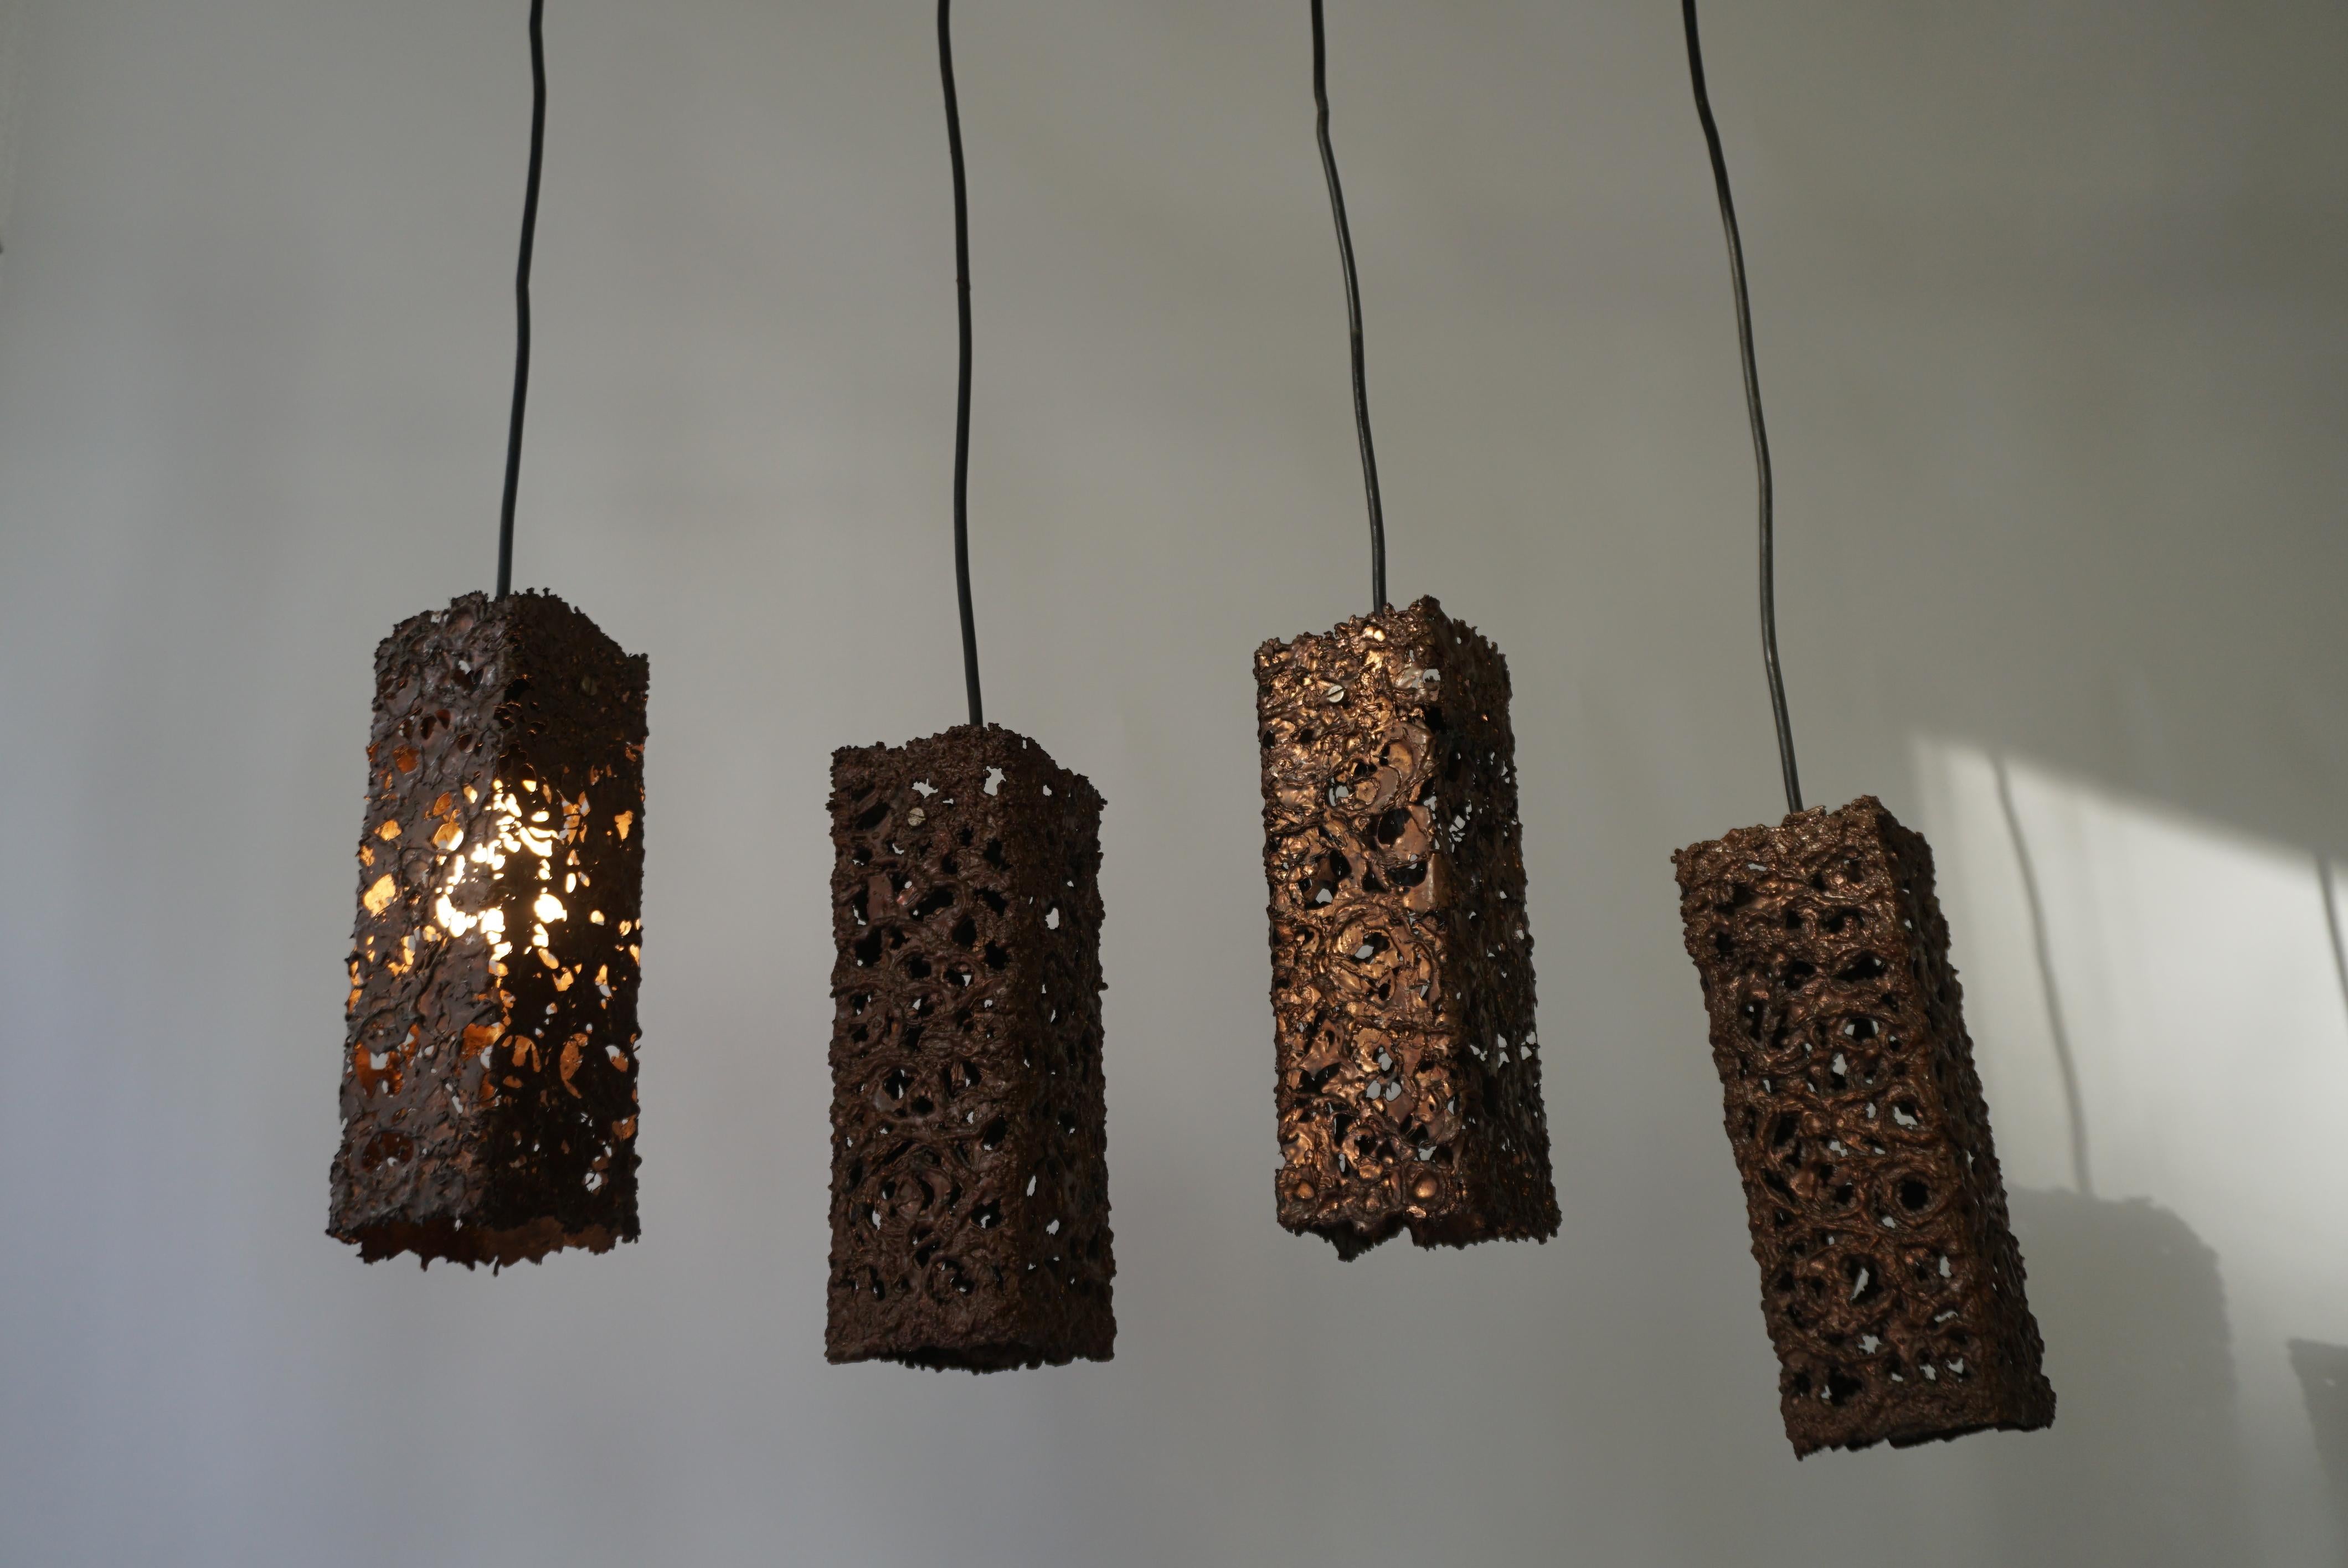 Four Organic Relief Copper Ceiling Lamp by Aimo Tukiainen Finland, 1960's For Sale 1